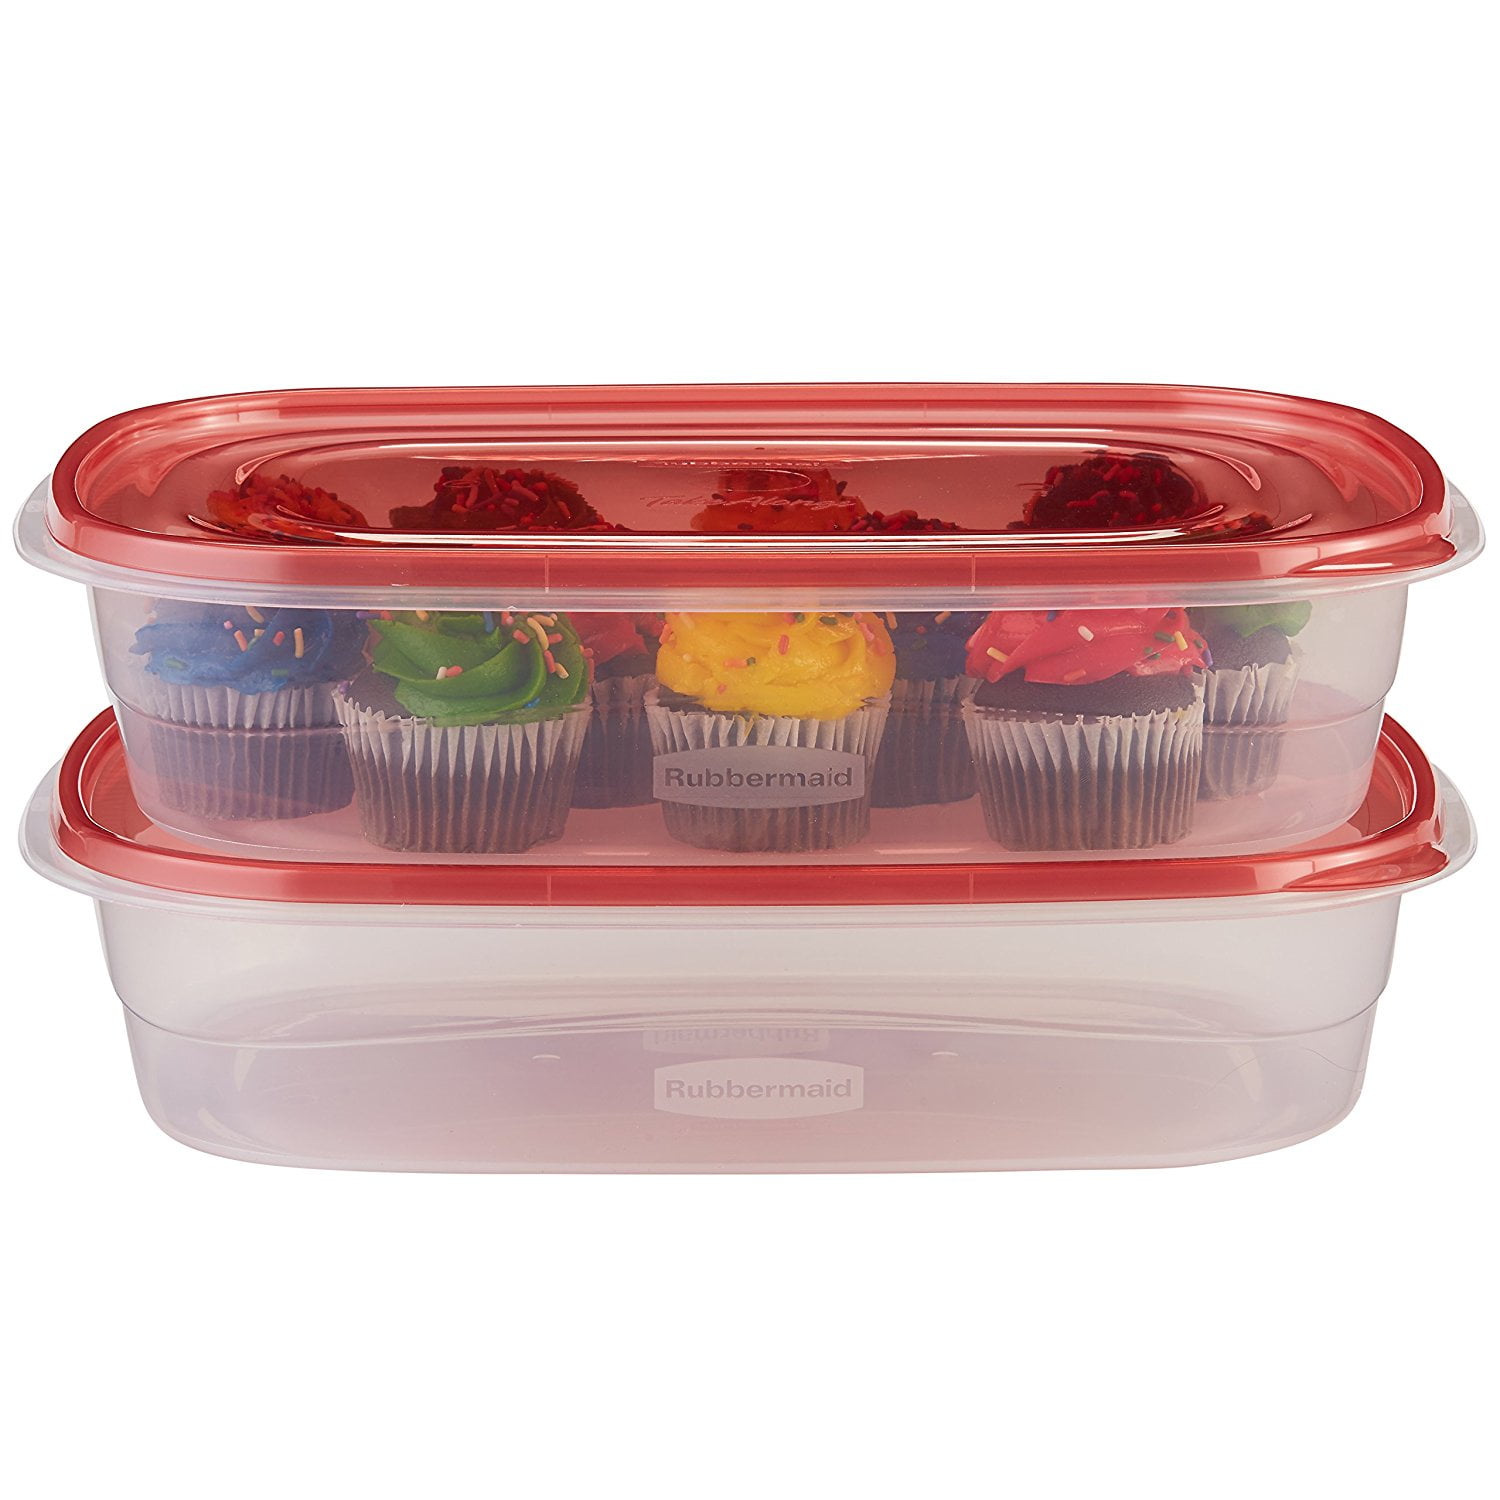 Rubbermaid Take Along Food Storage Large Rectangle Red 2 Pack 4 Containers